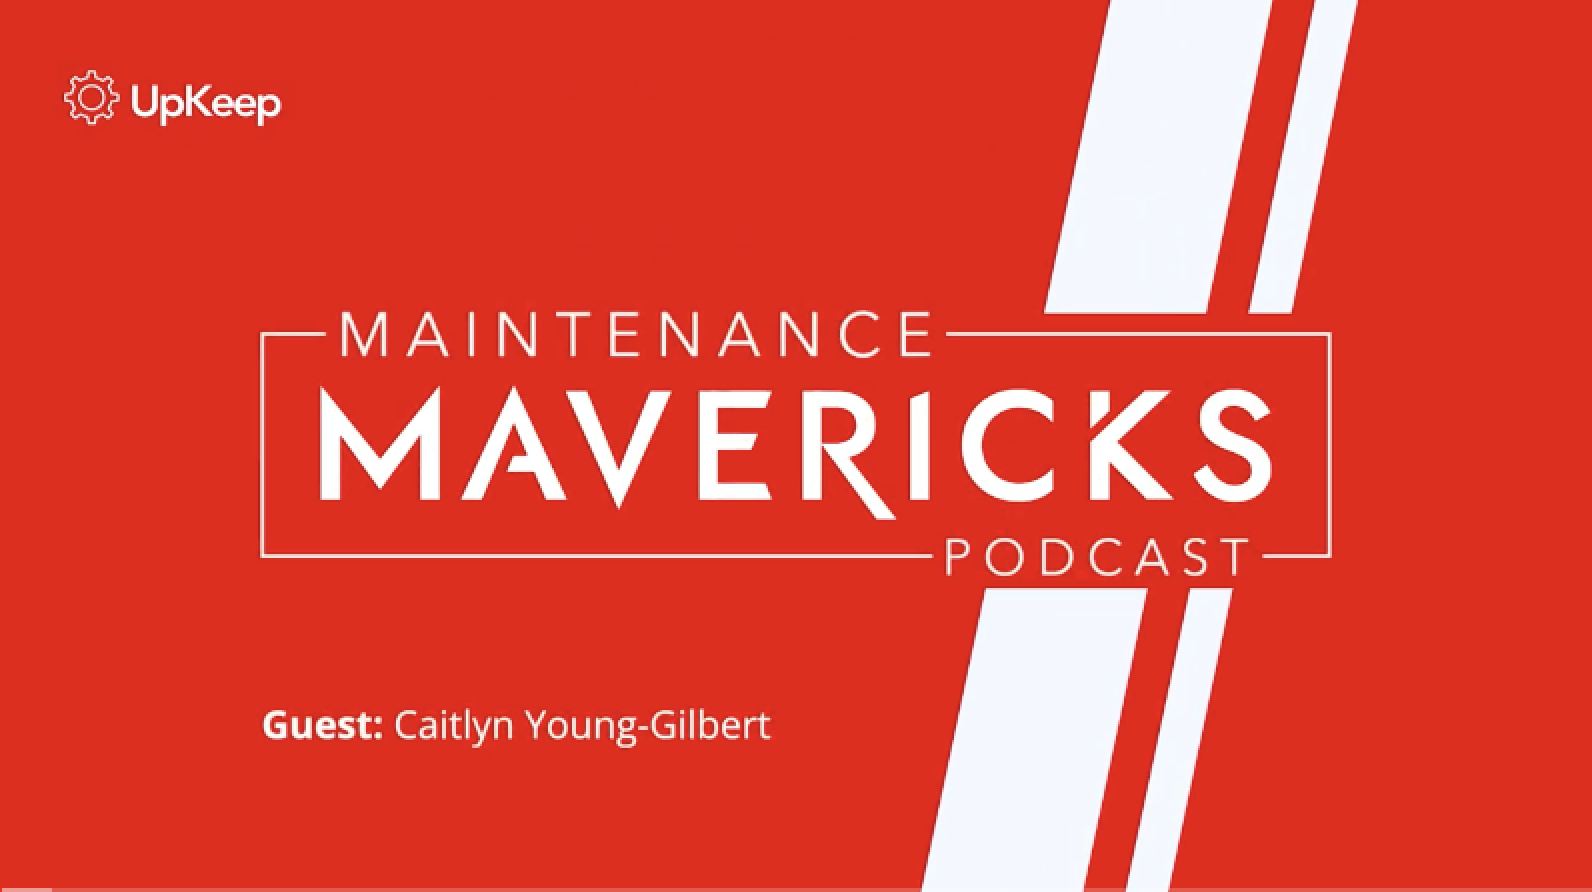 S4:E01 Women in Maintenance with Caitlyn Young-Gilbert